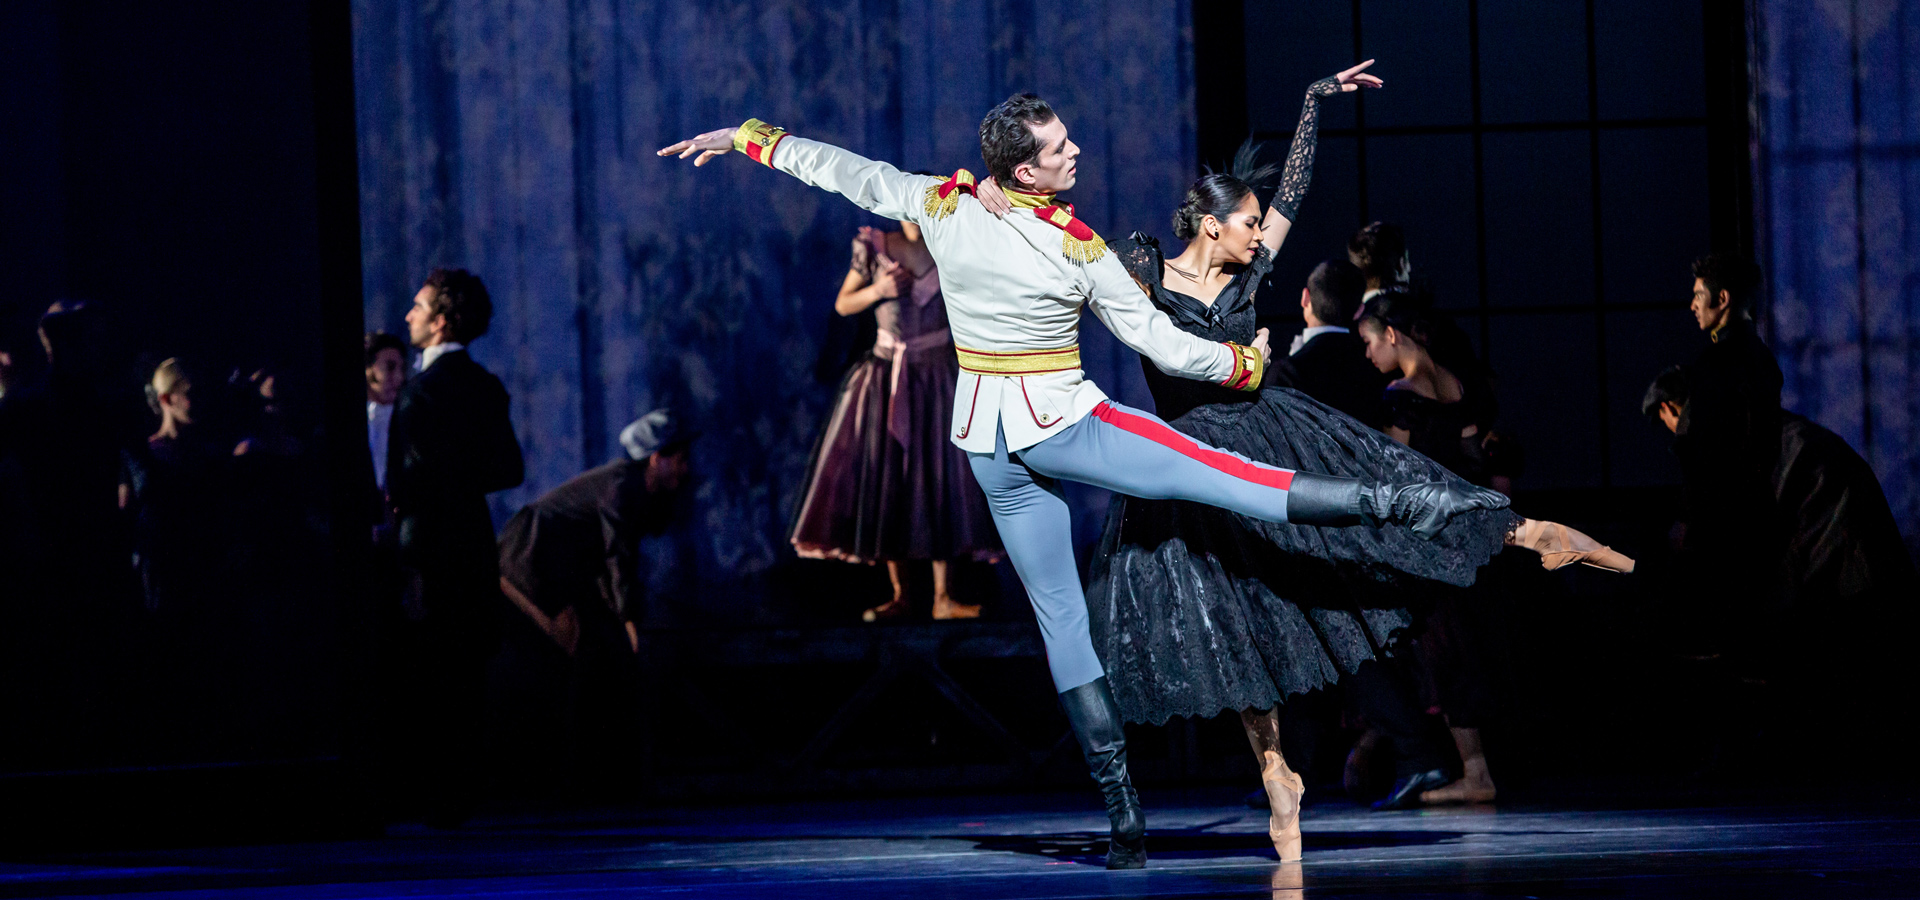 Christine Rocas and Dylan Gutierrez dancing together on stage amidst a performance of Anna Karenina.